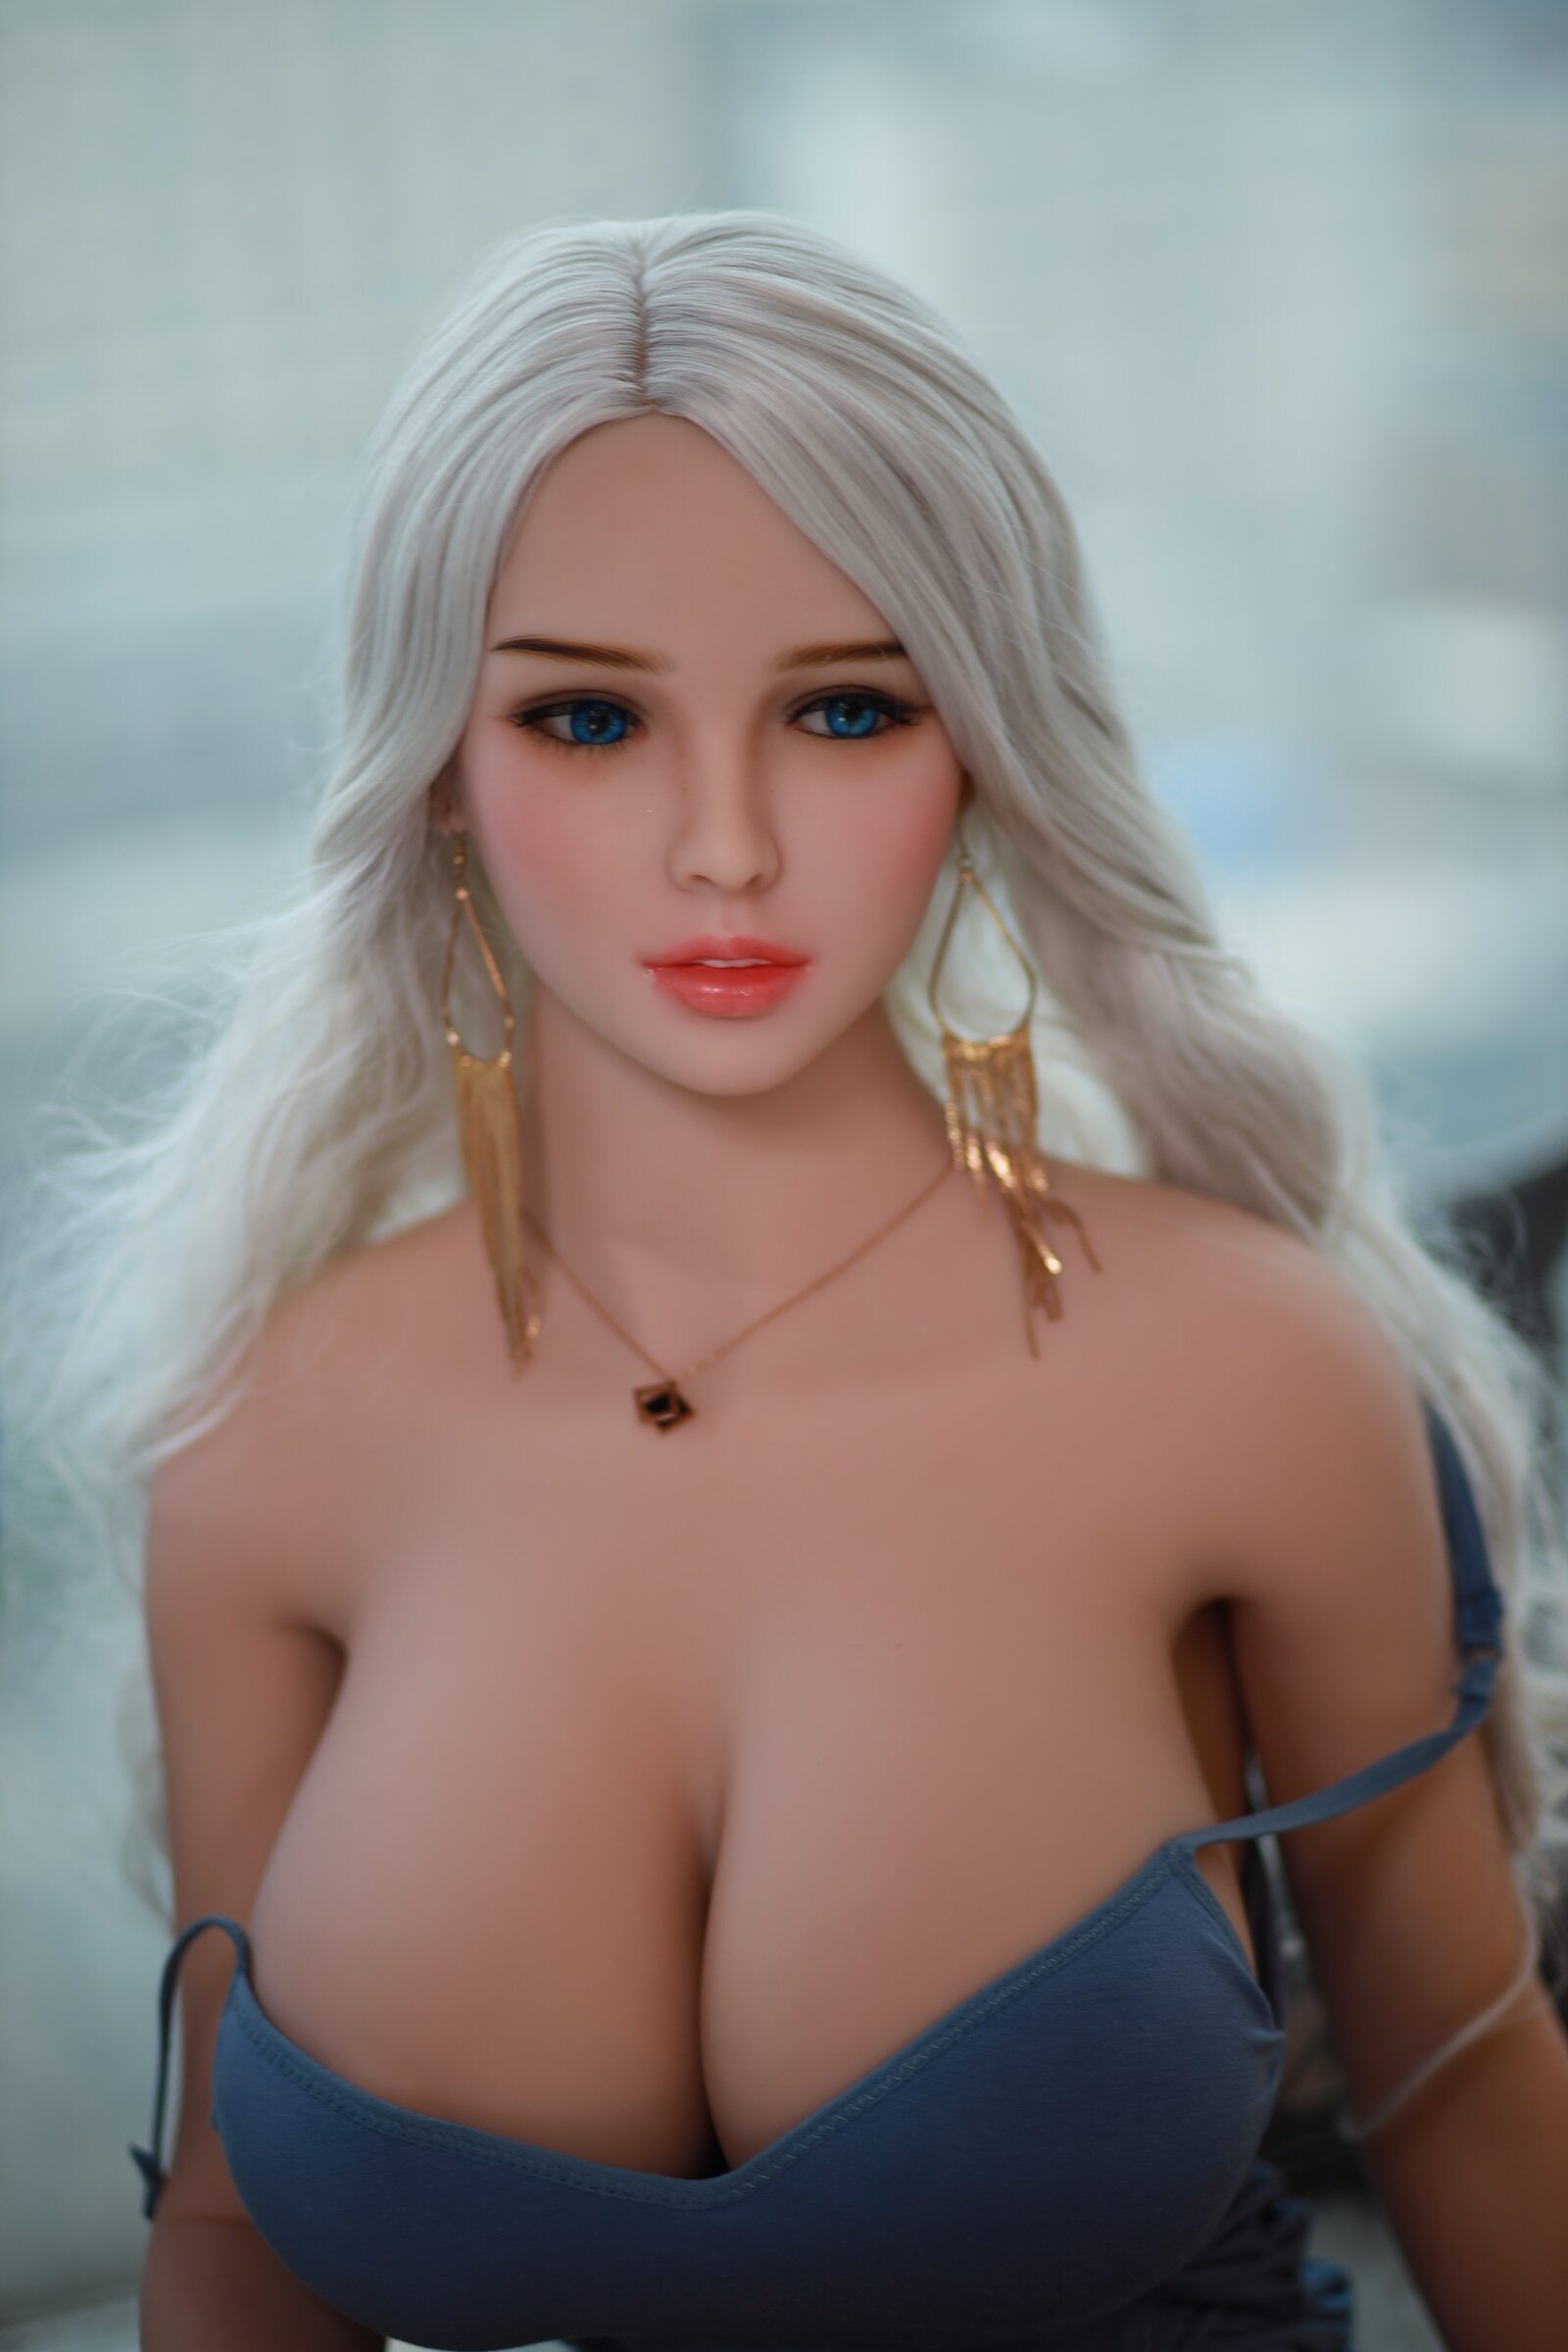 TPE Adult Dolls Sexy Lady Real Pussy Vagina Anus Lifelike Oral Sex Anime Love Dolls for Man Masturbator Love Dolls,Masturbator,Love Dolls,TPE Love Dolls,TPE Adult Love Dolls,TPE Adult Masturbator Love Dolls